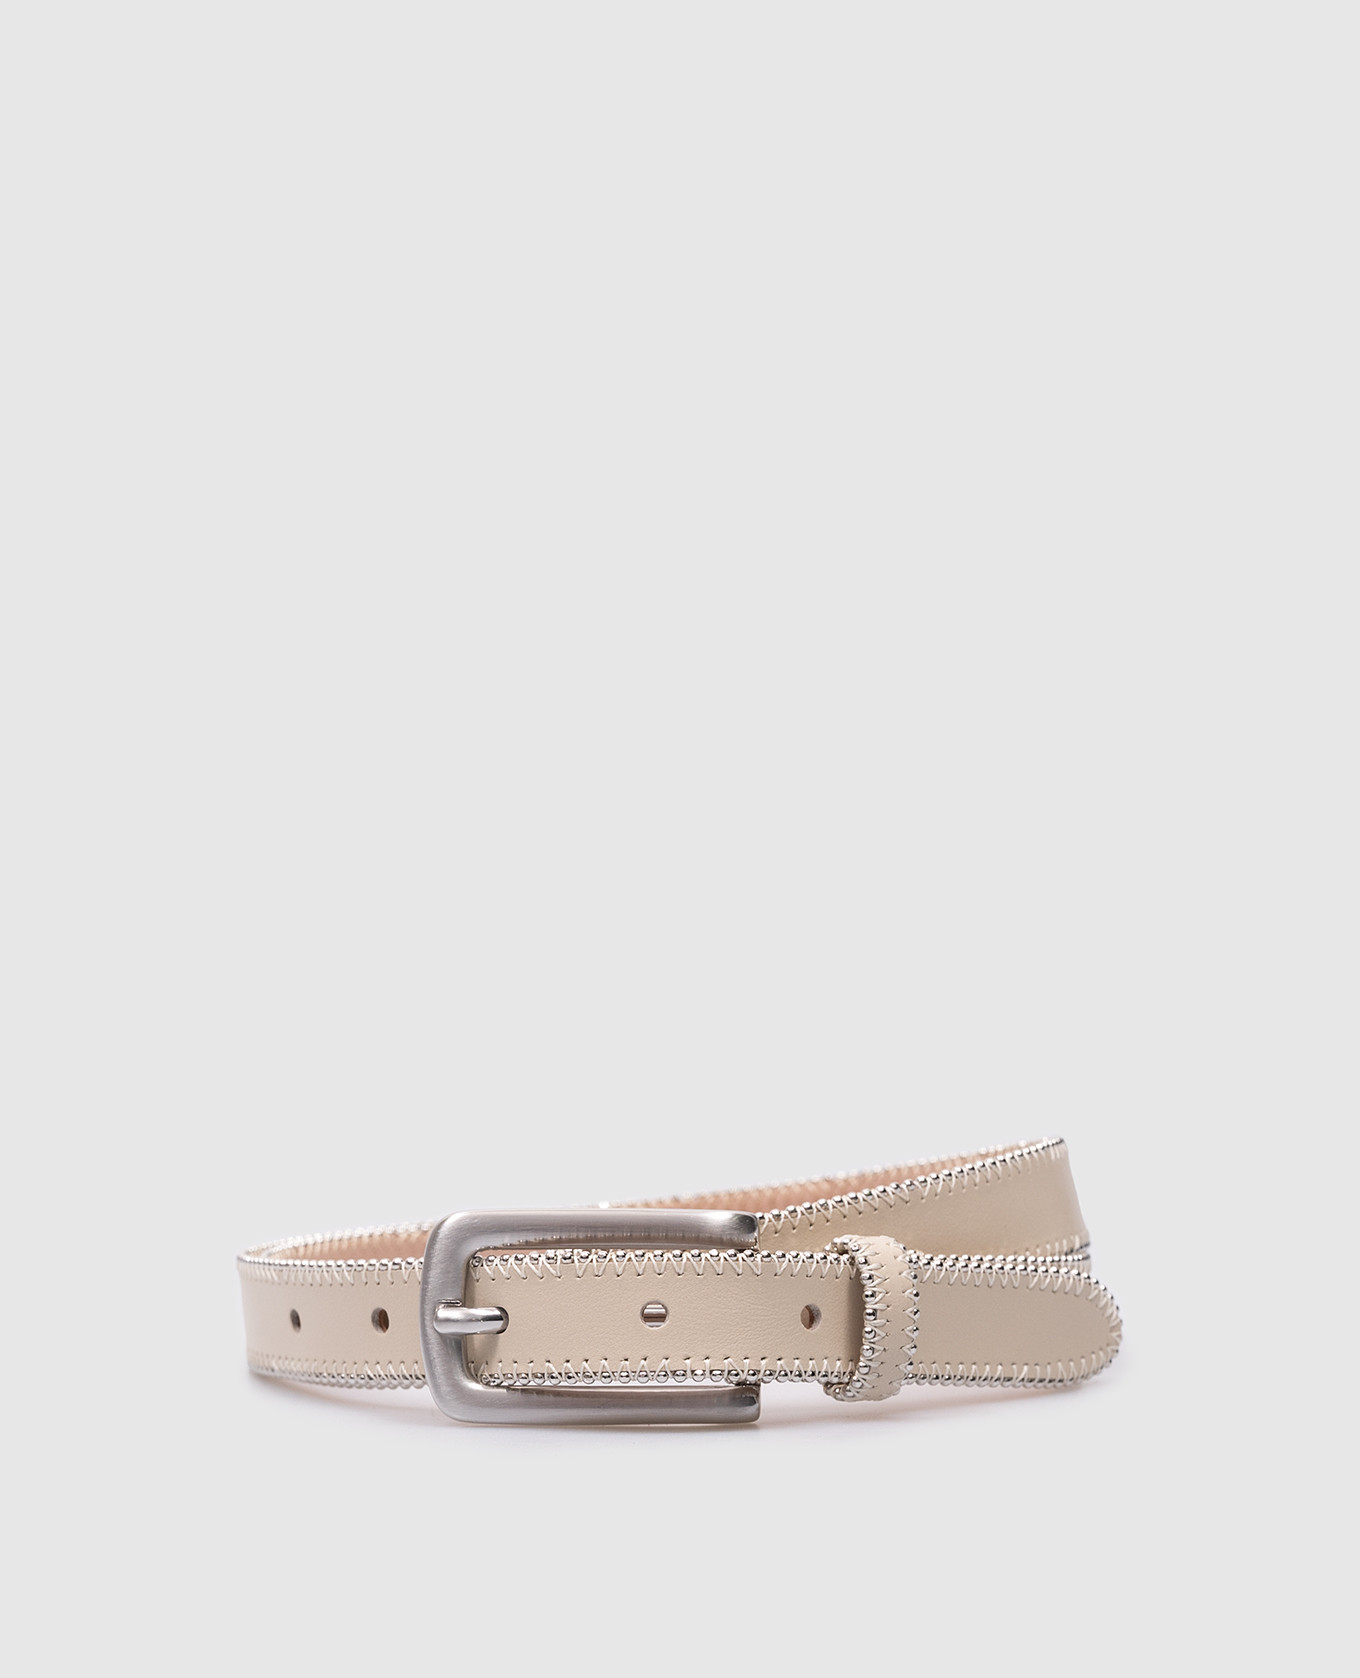 Beige leather belt with monil chain